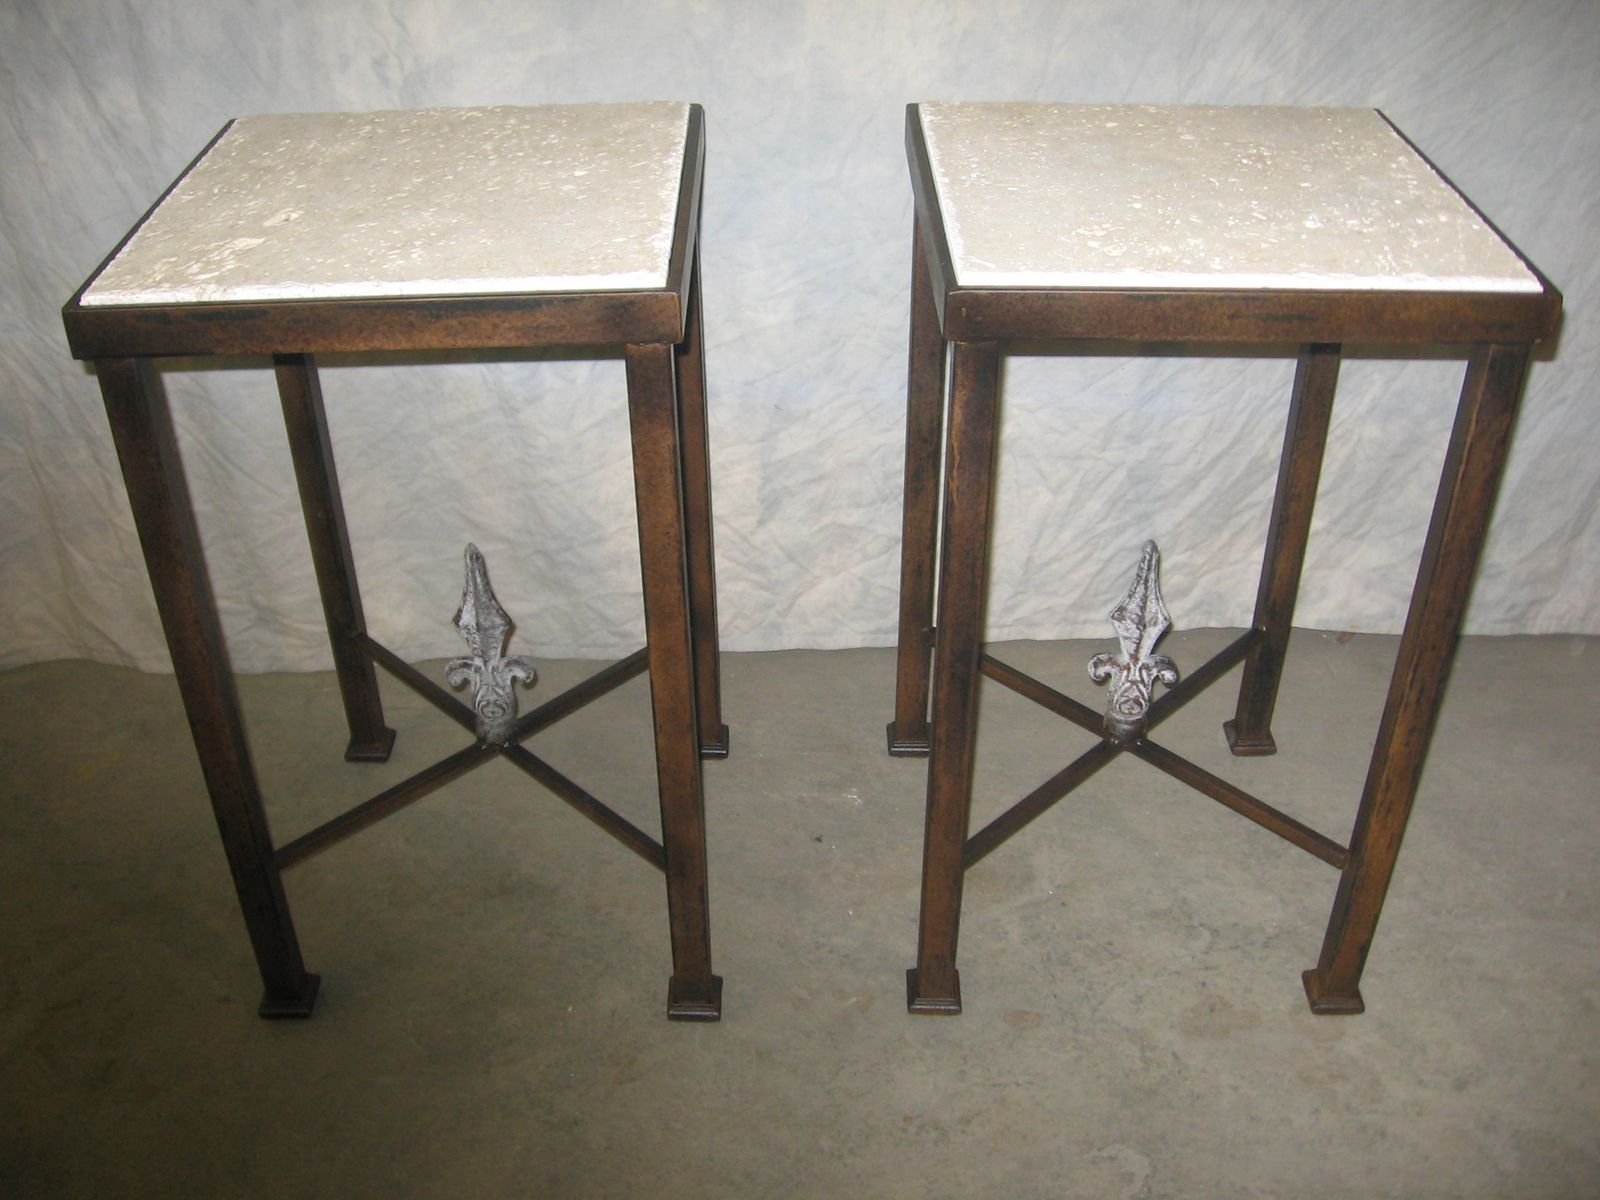 Ferro Designs LLC custom iron end table with a dark iron base finish and a tile top.